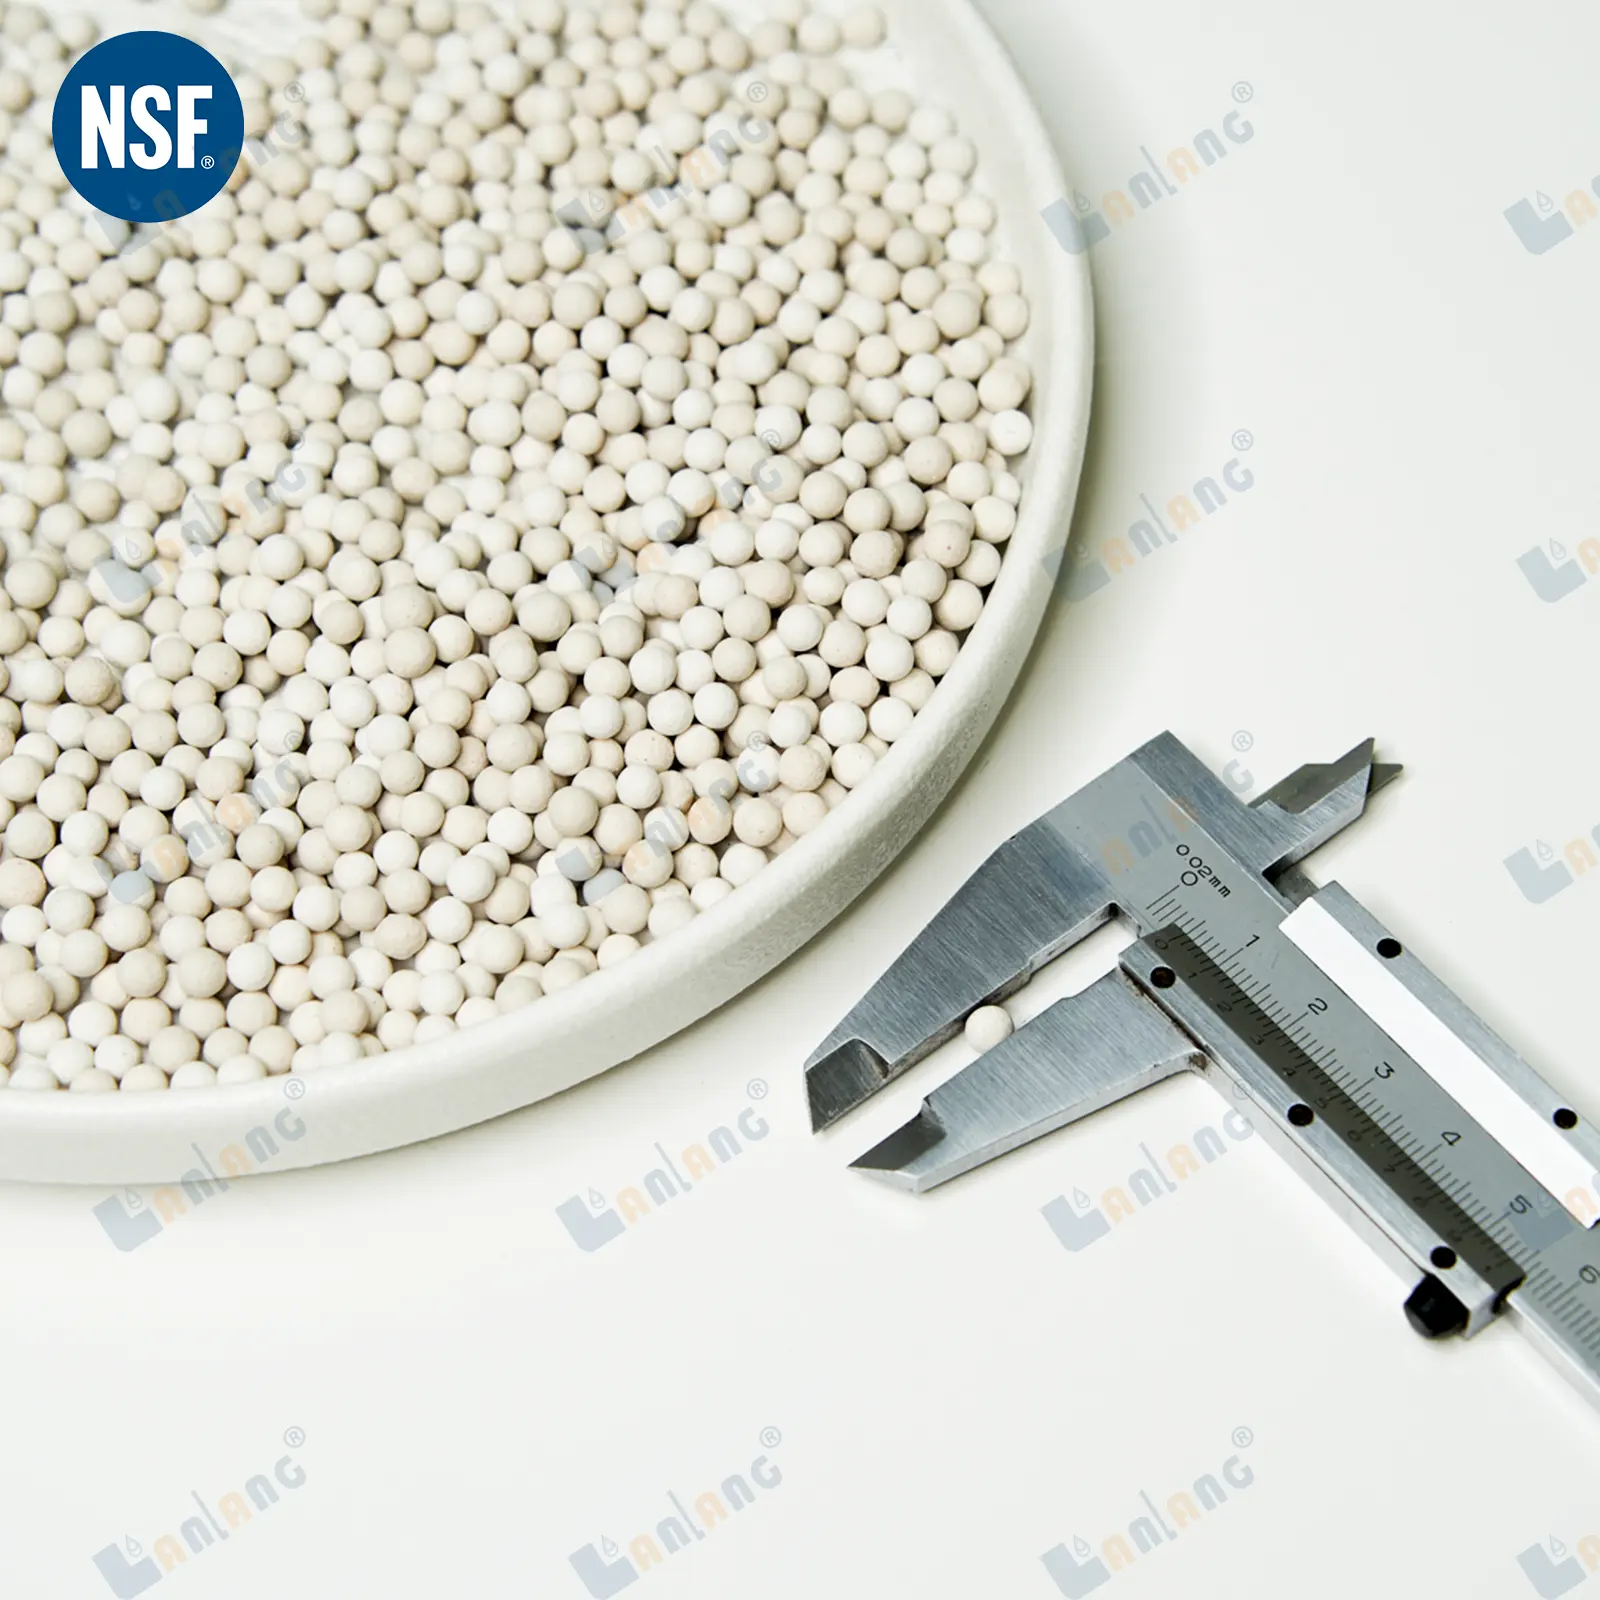 Lanlang Nsf Grade Calcium Sulfite Balls Dechlorine Calcium Sulfite Residual Chlorine Remover For Water Treatment Systems